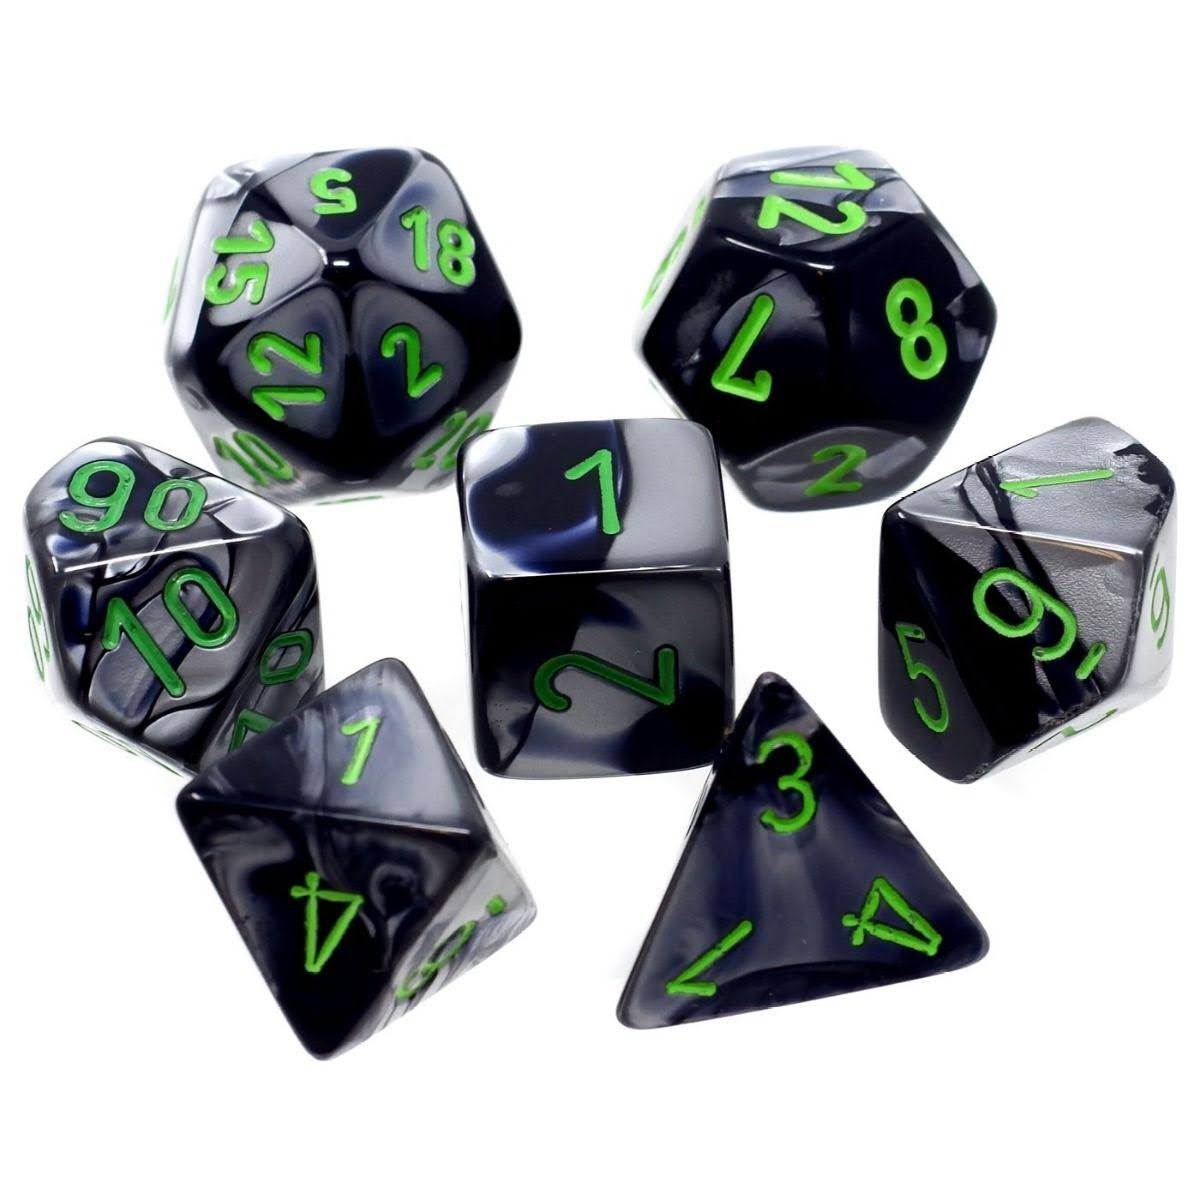 Chessex Polyhedral Gemini Dice Set - Black, Grey with Green, 7ct